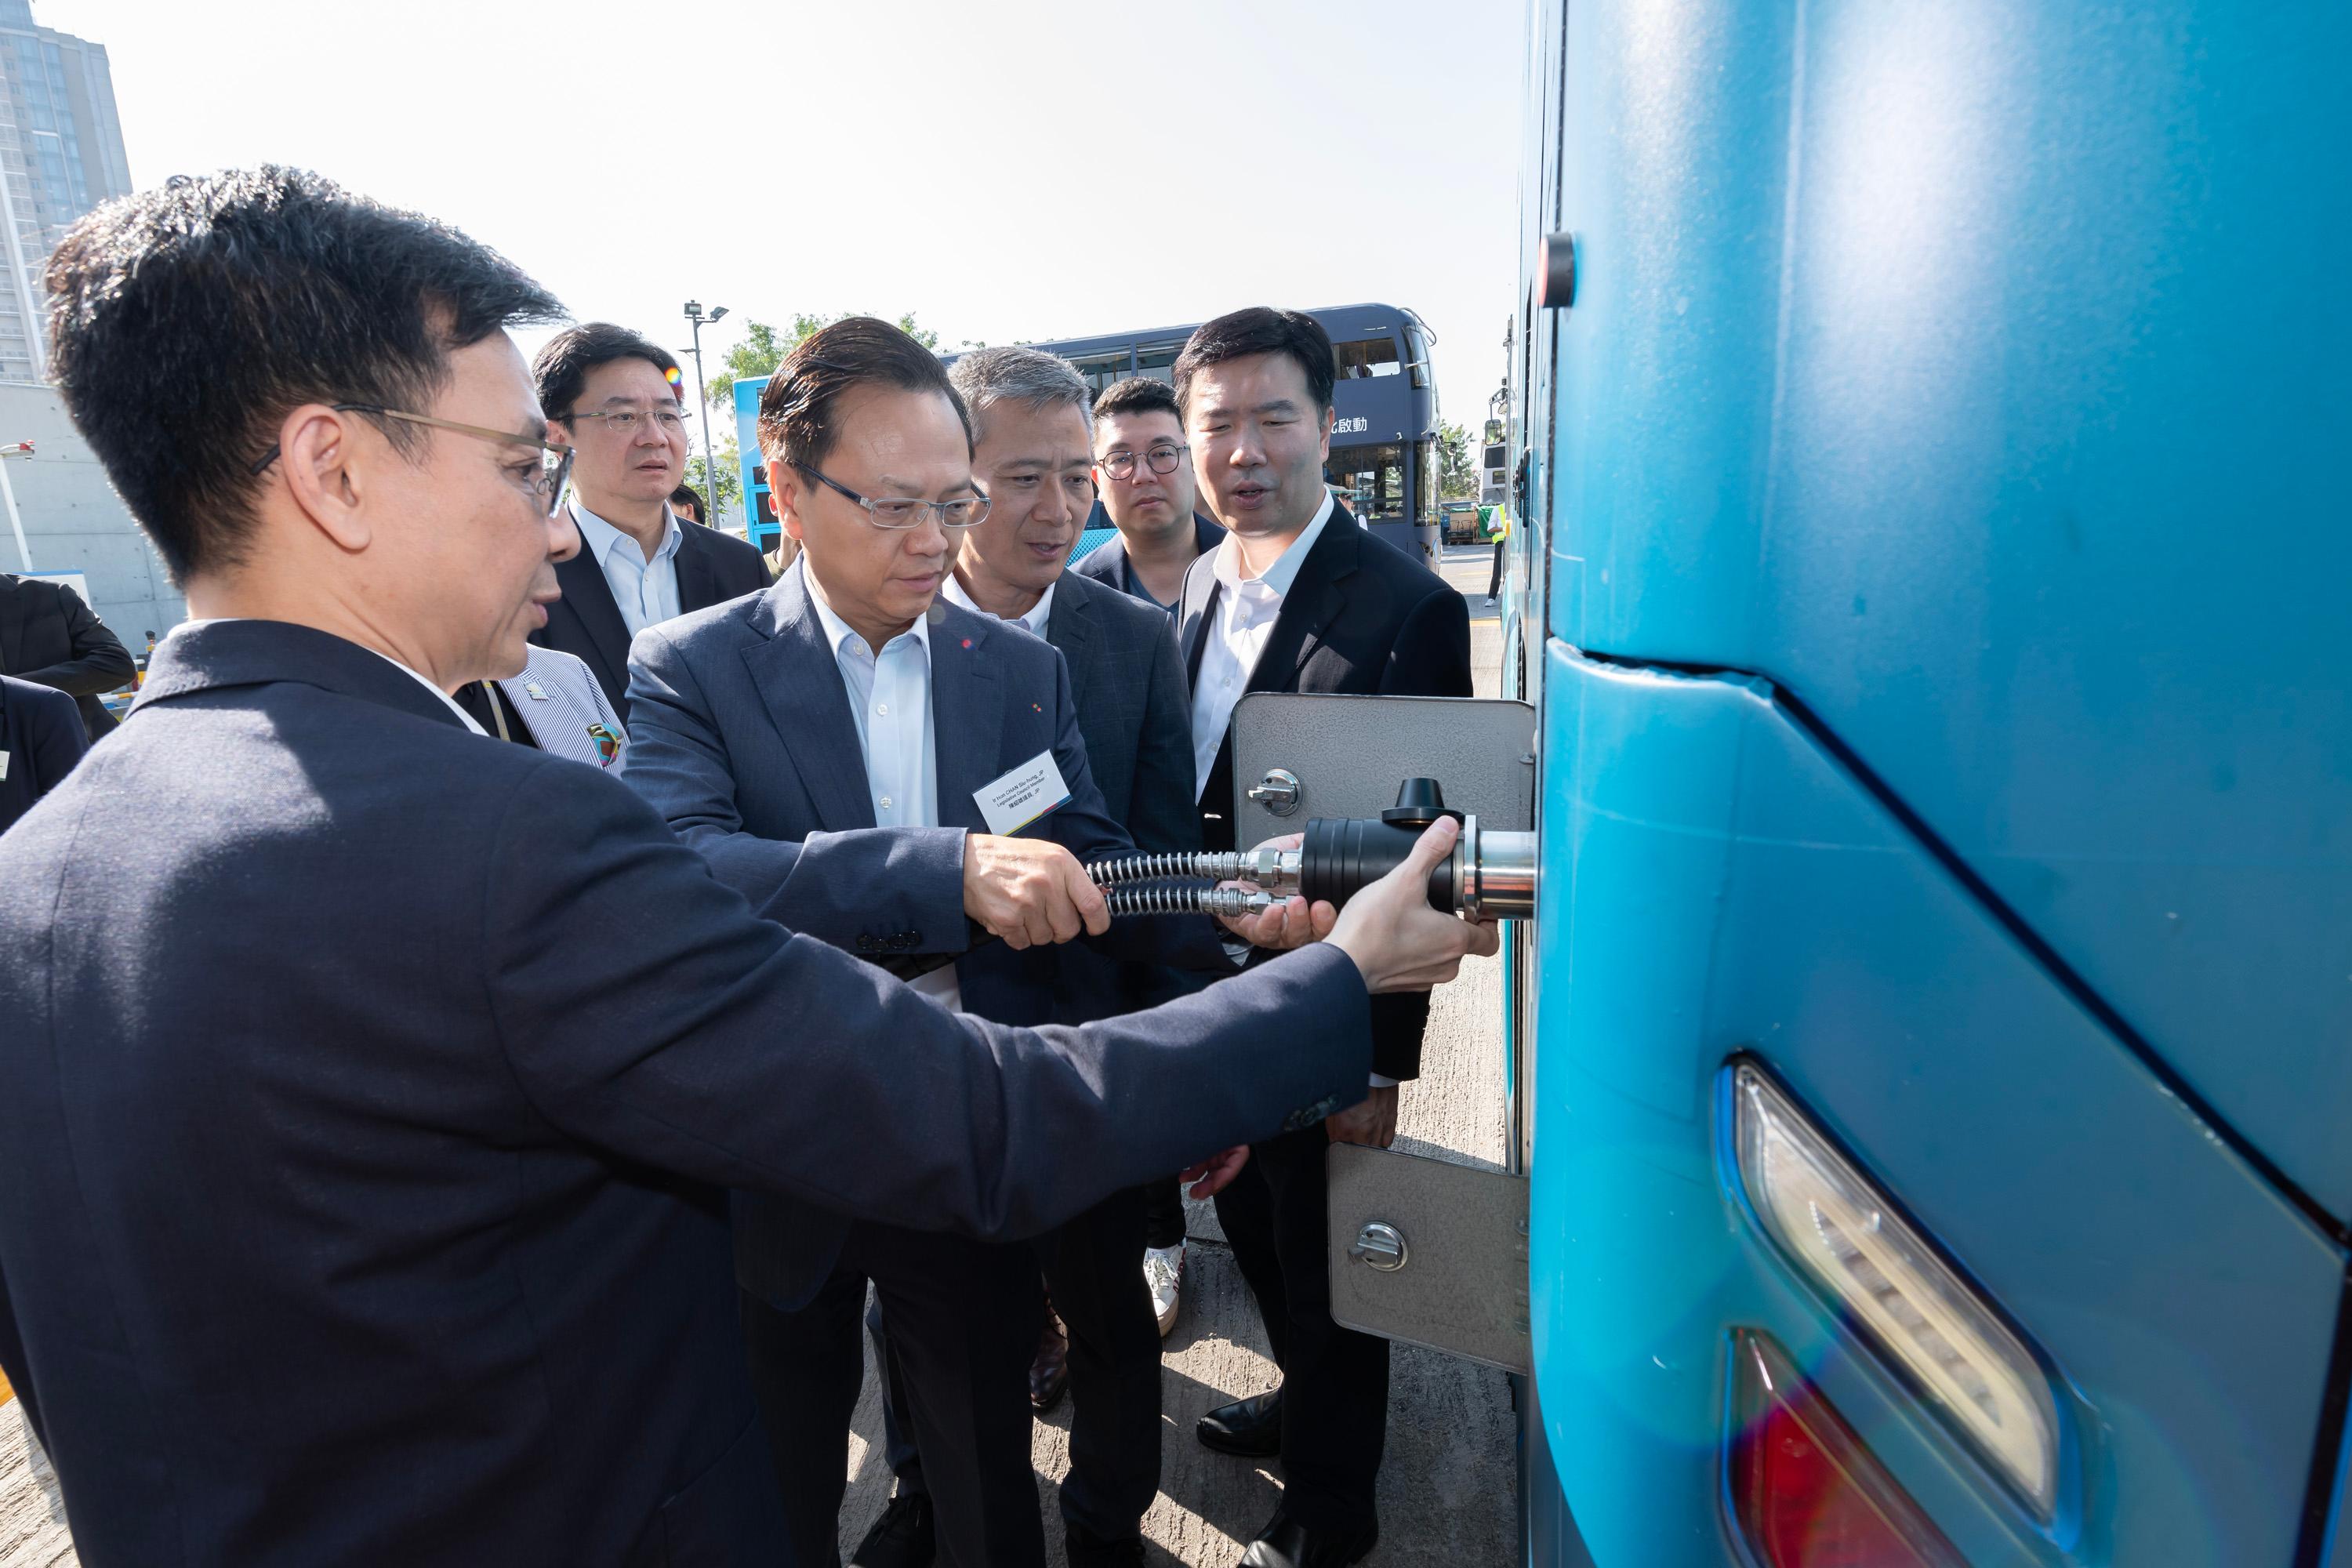 The Legislative Council Panel on Environmental Affairs and Panel on Transport conducted a joint visit to the Citybus Hydrogen Refuelling Station and its hydrogen bus today (December 12). Photo shows the Deputy Chairman of the Panel on Transport, Mr Chan Siu-hung (second left), and other Members learning about the environmental friendliness of the hydrogen bus.